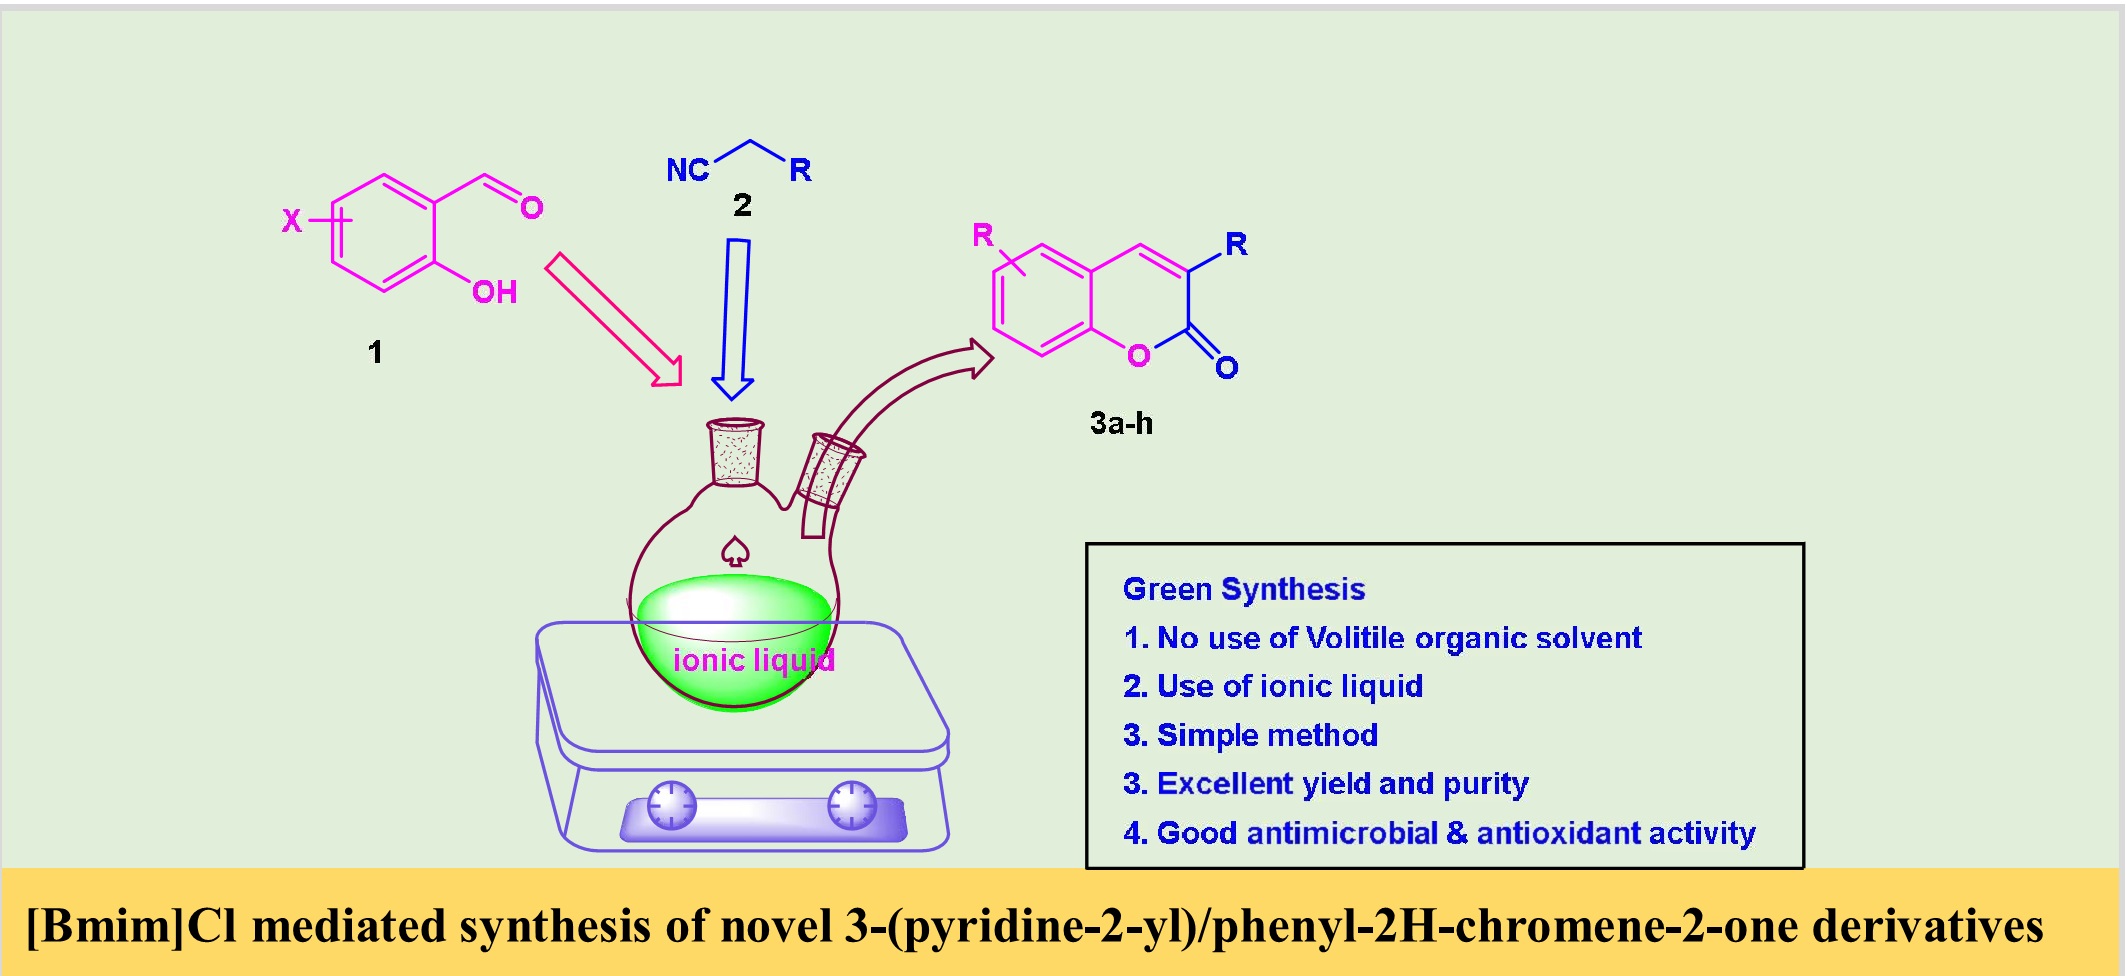 [Bmim]Cl Mediated Synthesis of Novel 3-(pyridine-2-yl)/Phenyl-2H-Chromene-2-one Derivatives Under Solvent-Free Conditions and their Antibacterial, Antifungal, Antioxidant Study 